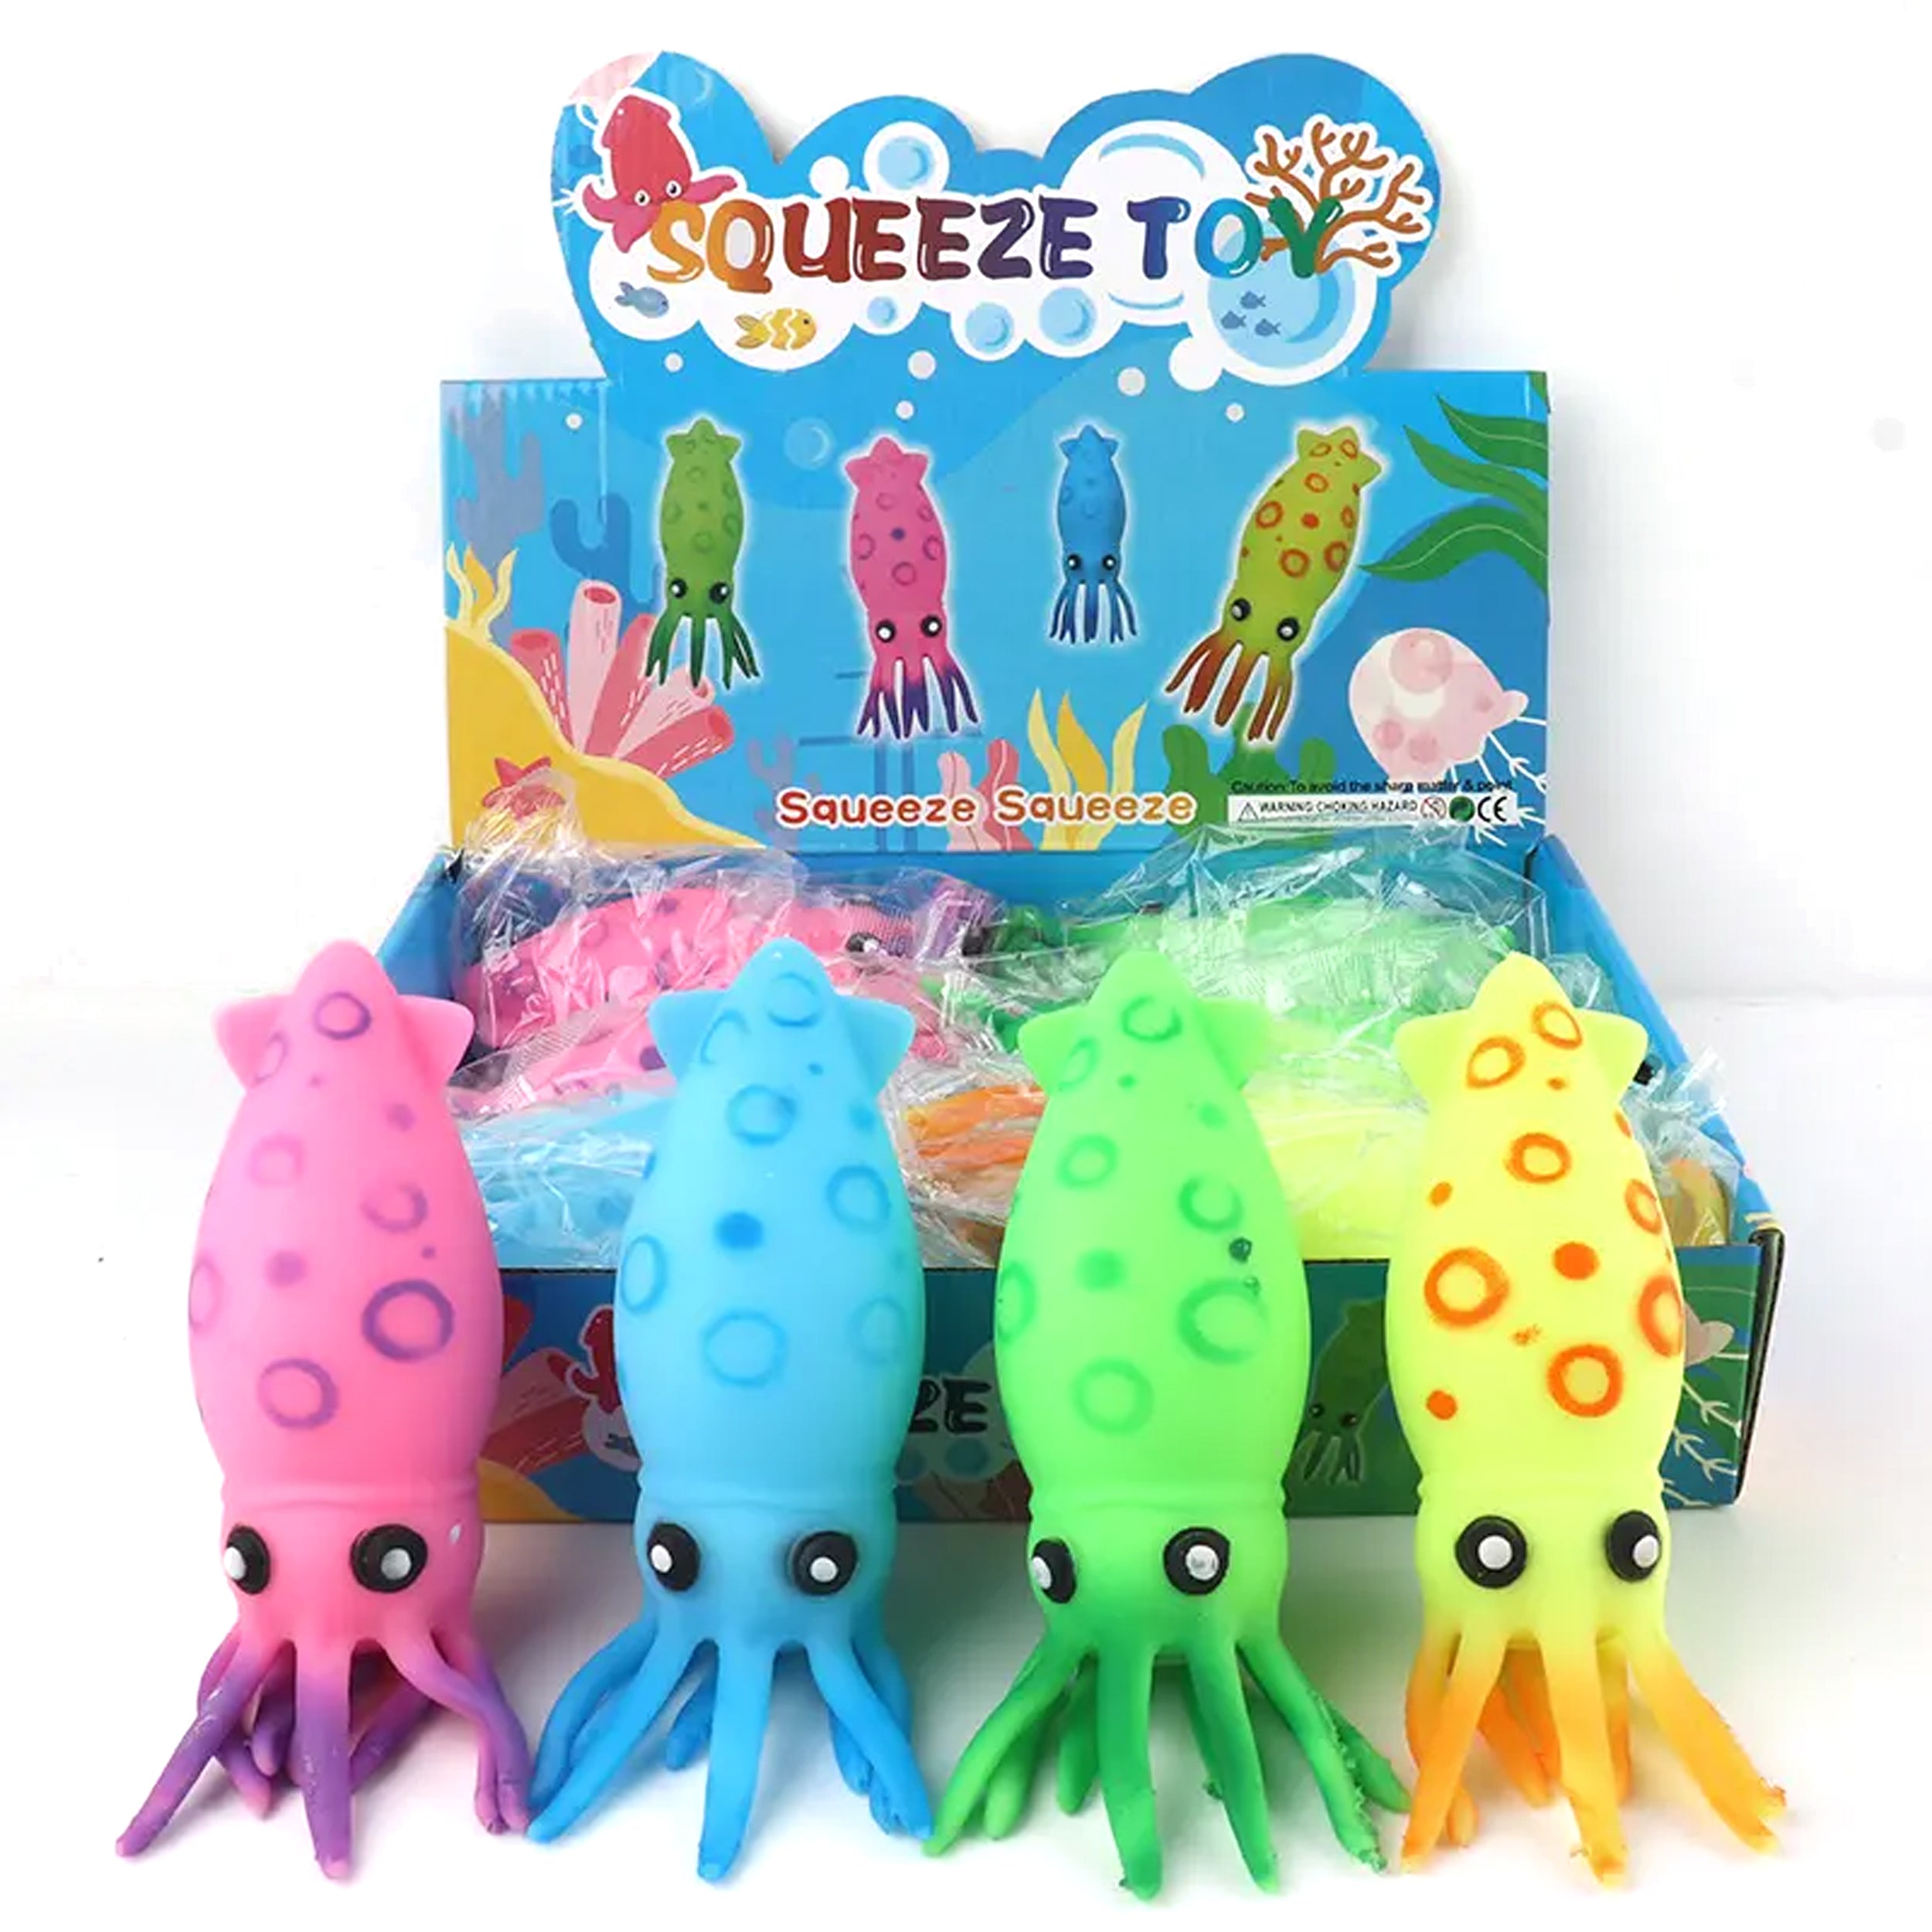 Octopus Stress Relief Squishy Fidget - Fun and Soothing Decompression Toy for Adults and Kids